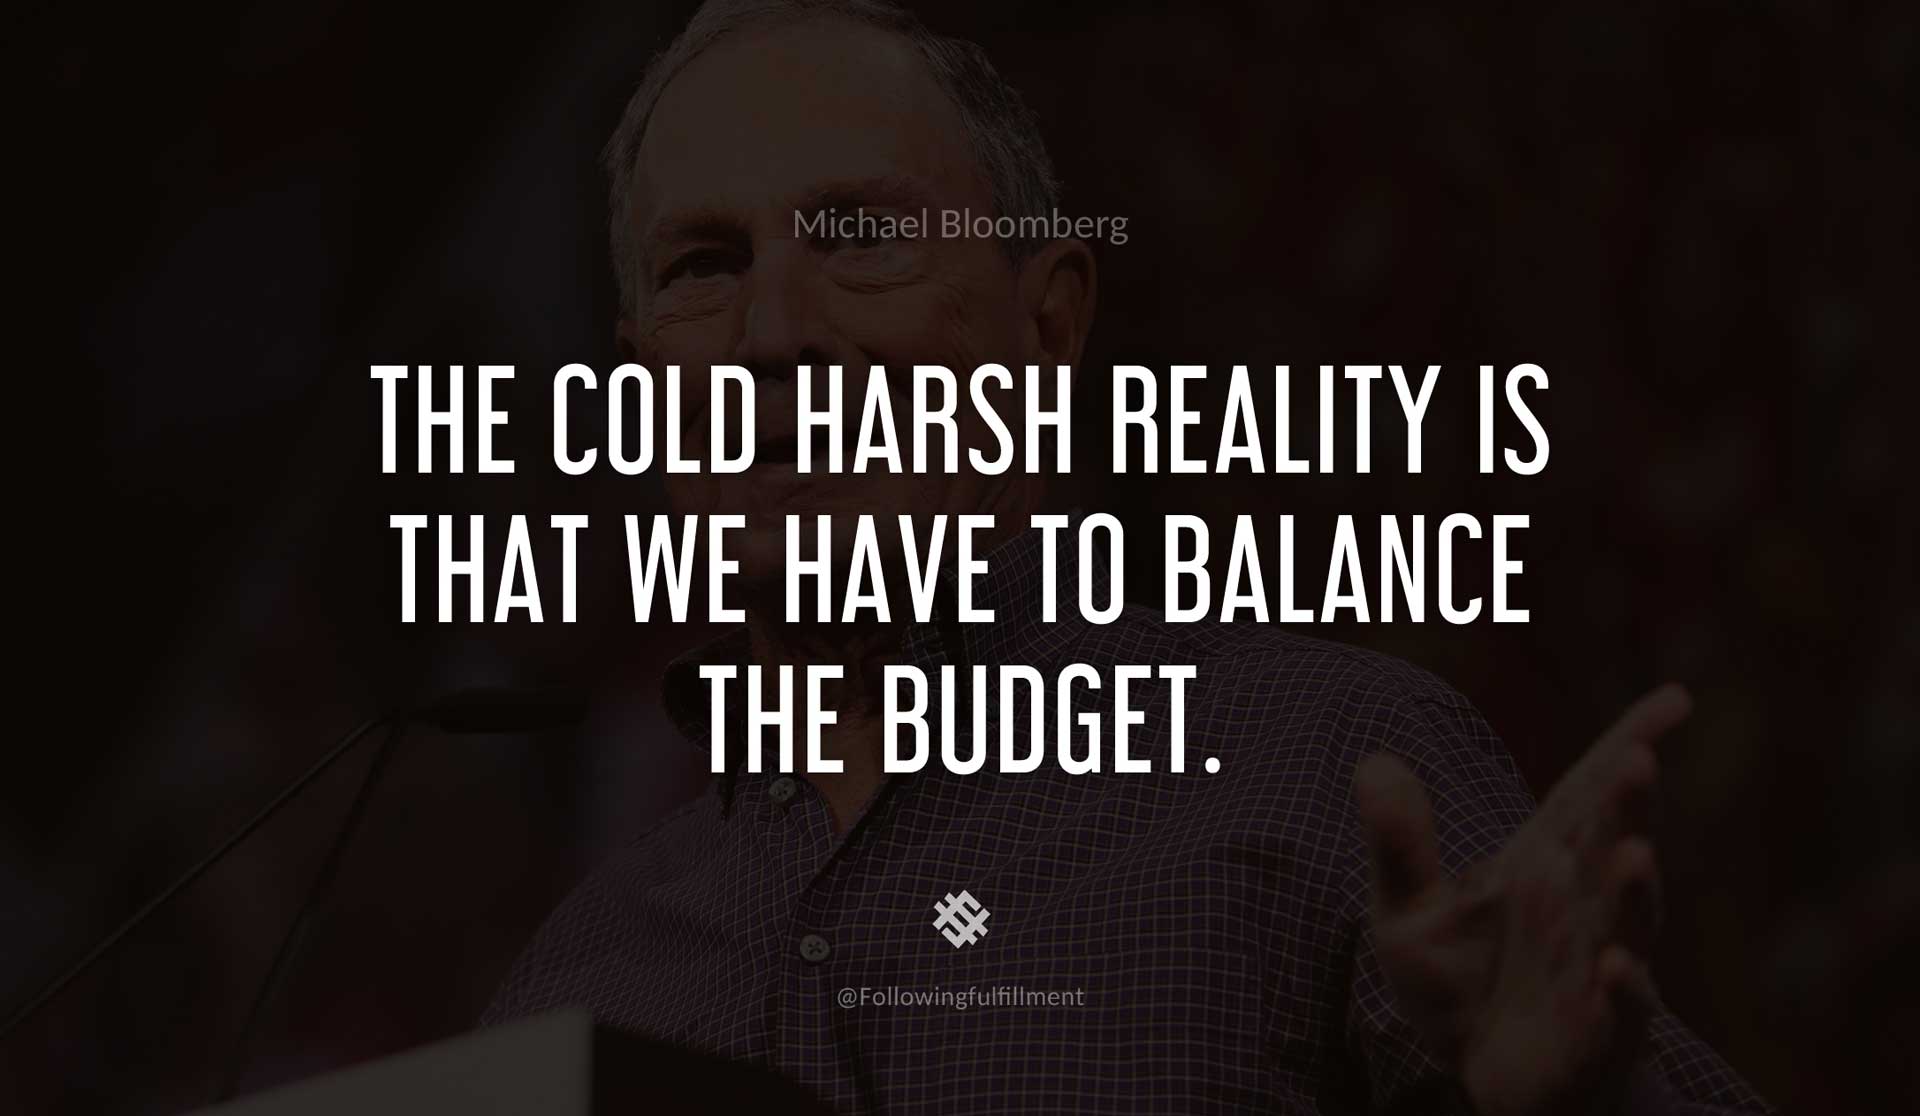 The-cold-harsh-reality-is-that-we-have-to-balance-the-budget.-MICHAEL-BLOOMBERG-Quote.jpg